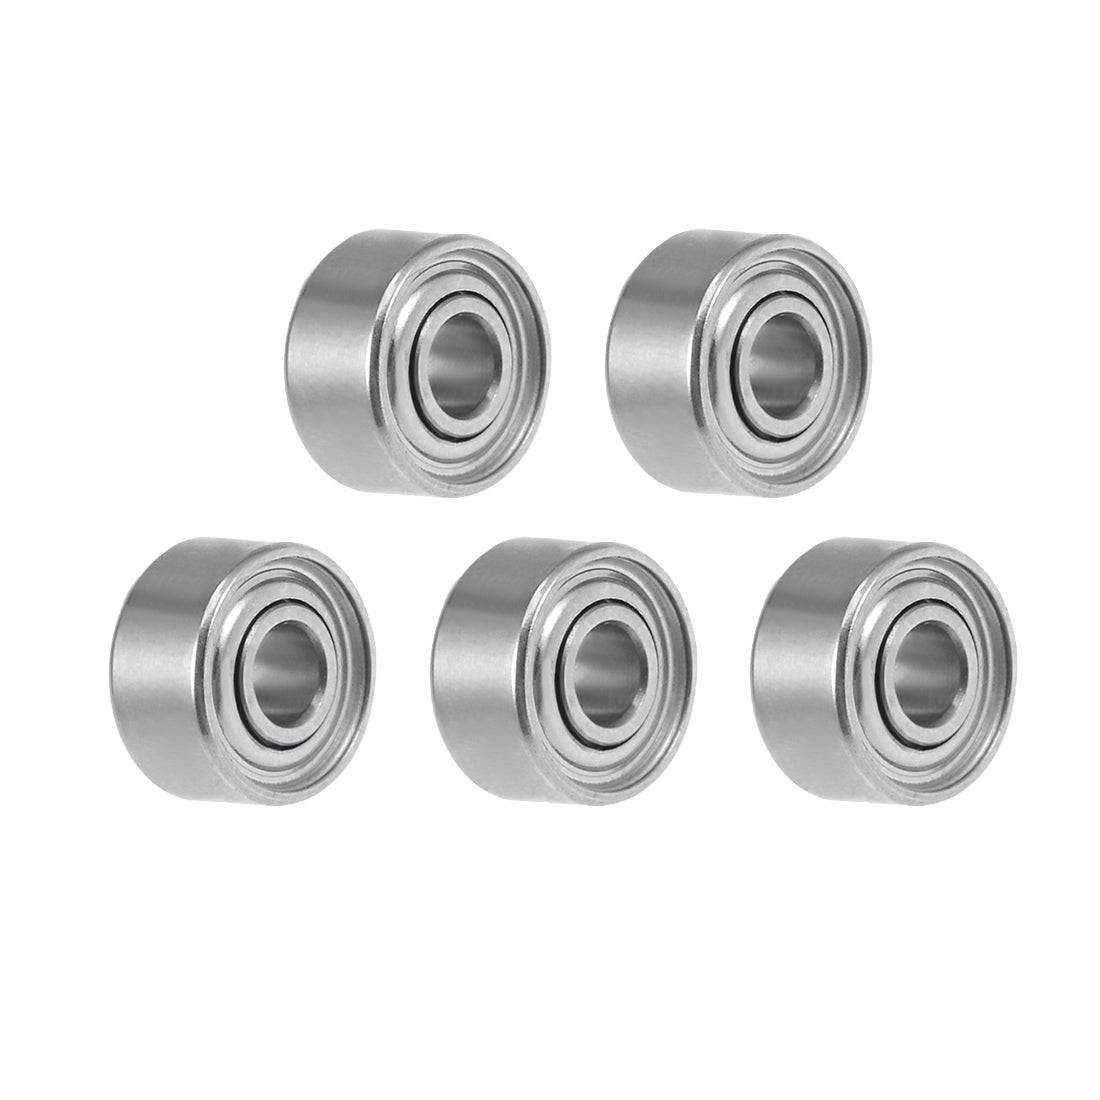 uxcell Uxcell Deep Groove Ball Bearings Metric Double Shielded Chrome Steel ABEC3 Z1 Level